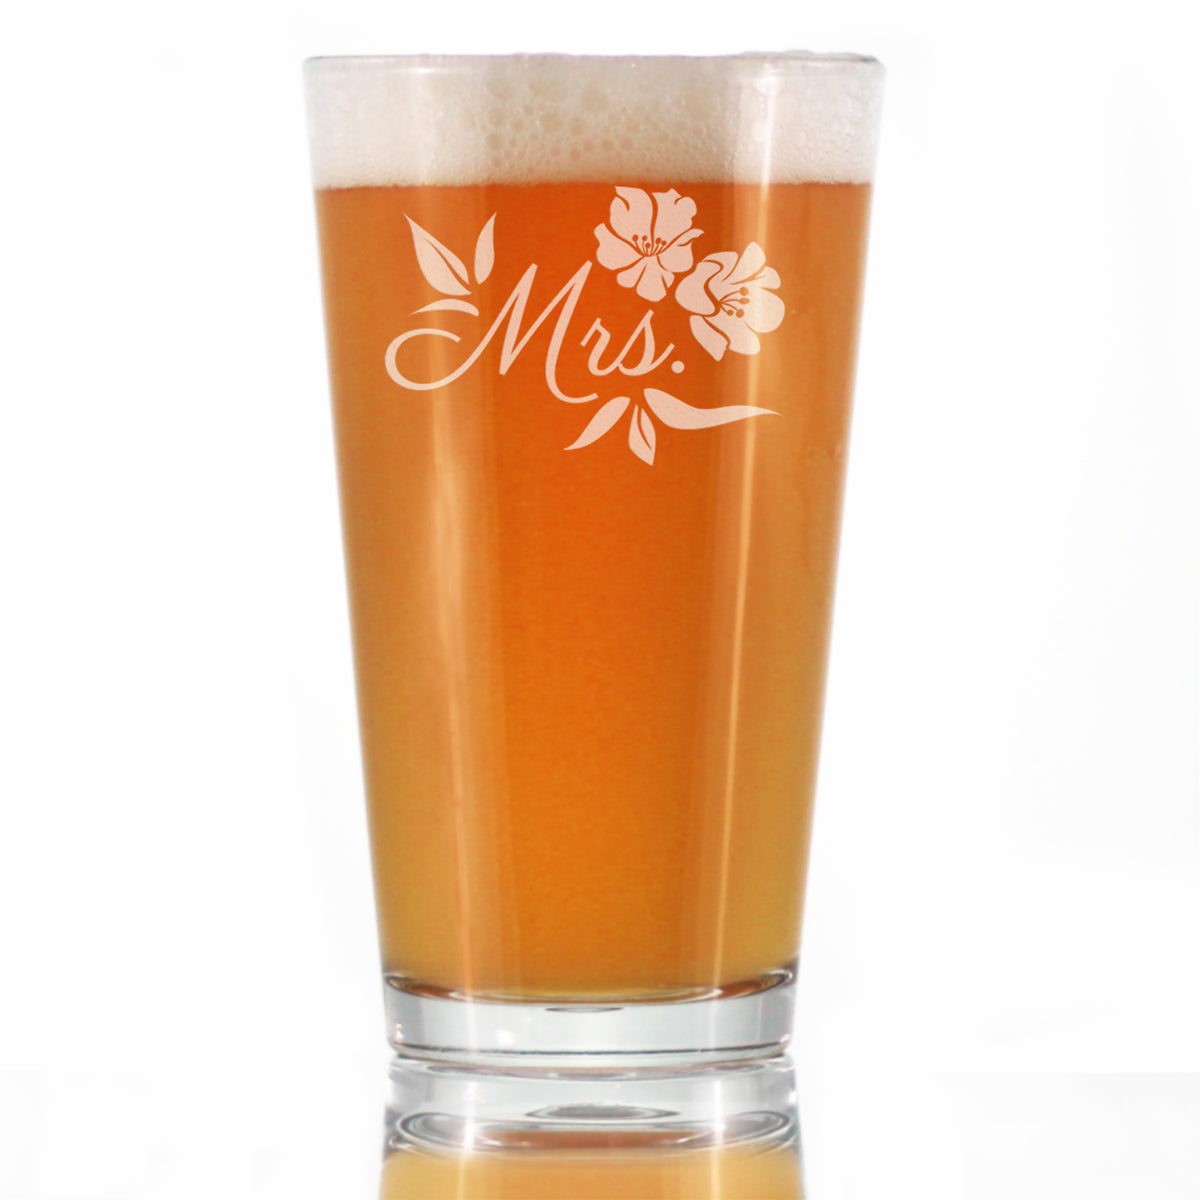 Mrs. Pint Glass - Unique Wedding Gift for Bride - Cute Engraved Wedding Cup Gift